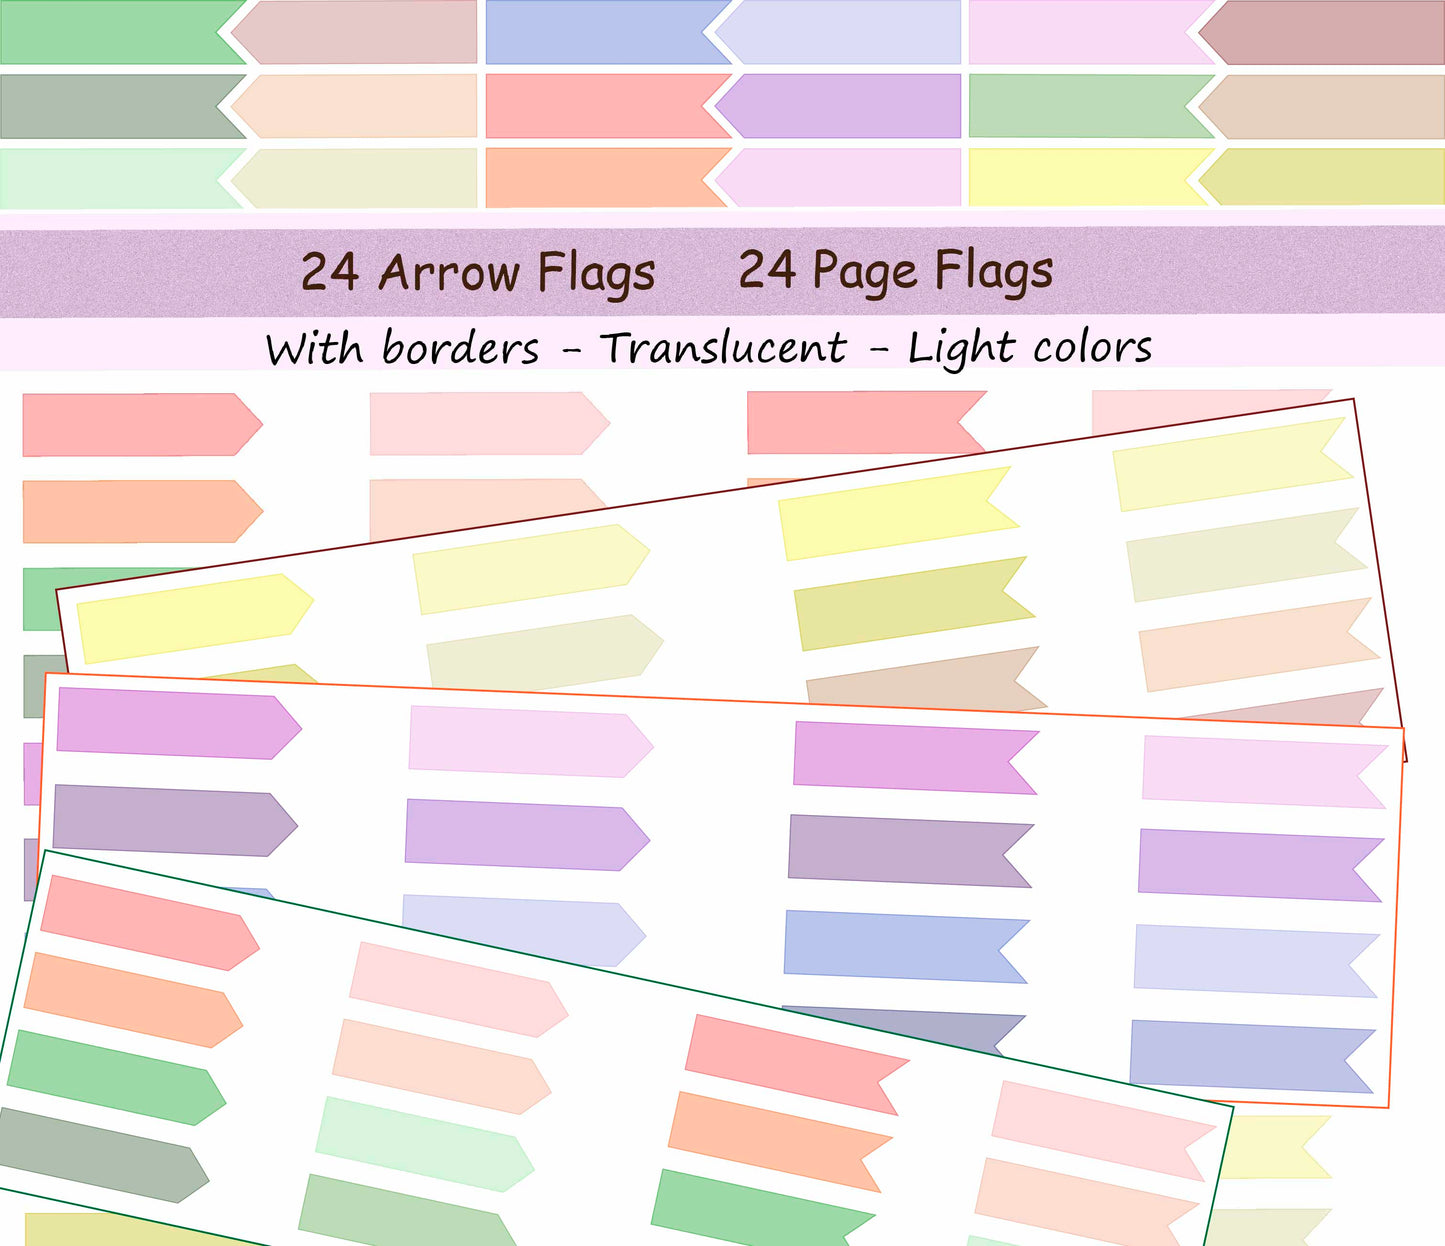 Translucent arrow & page flags with border | Light colors - Digital sticker